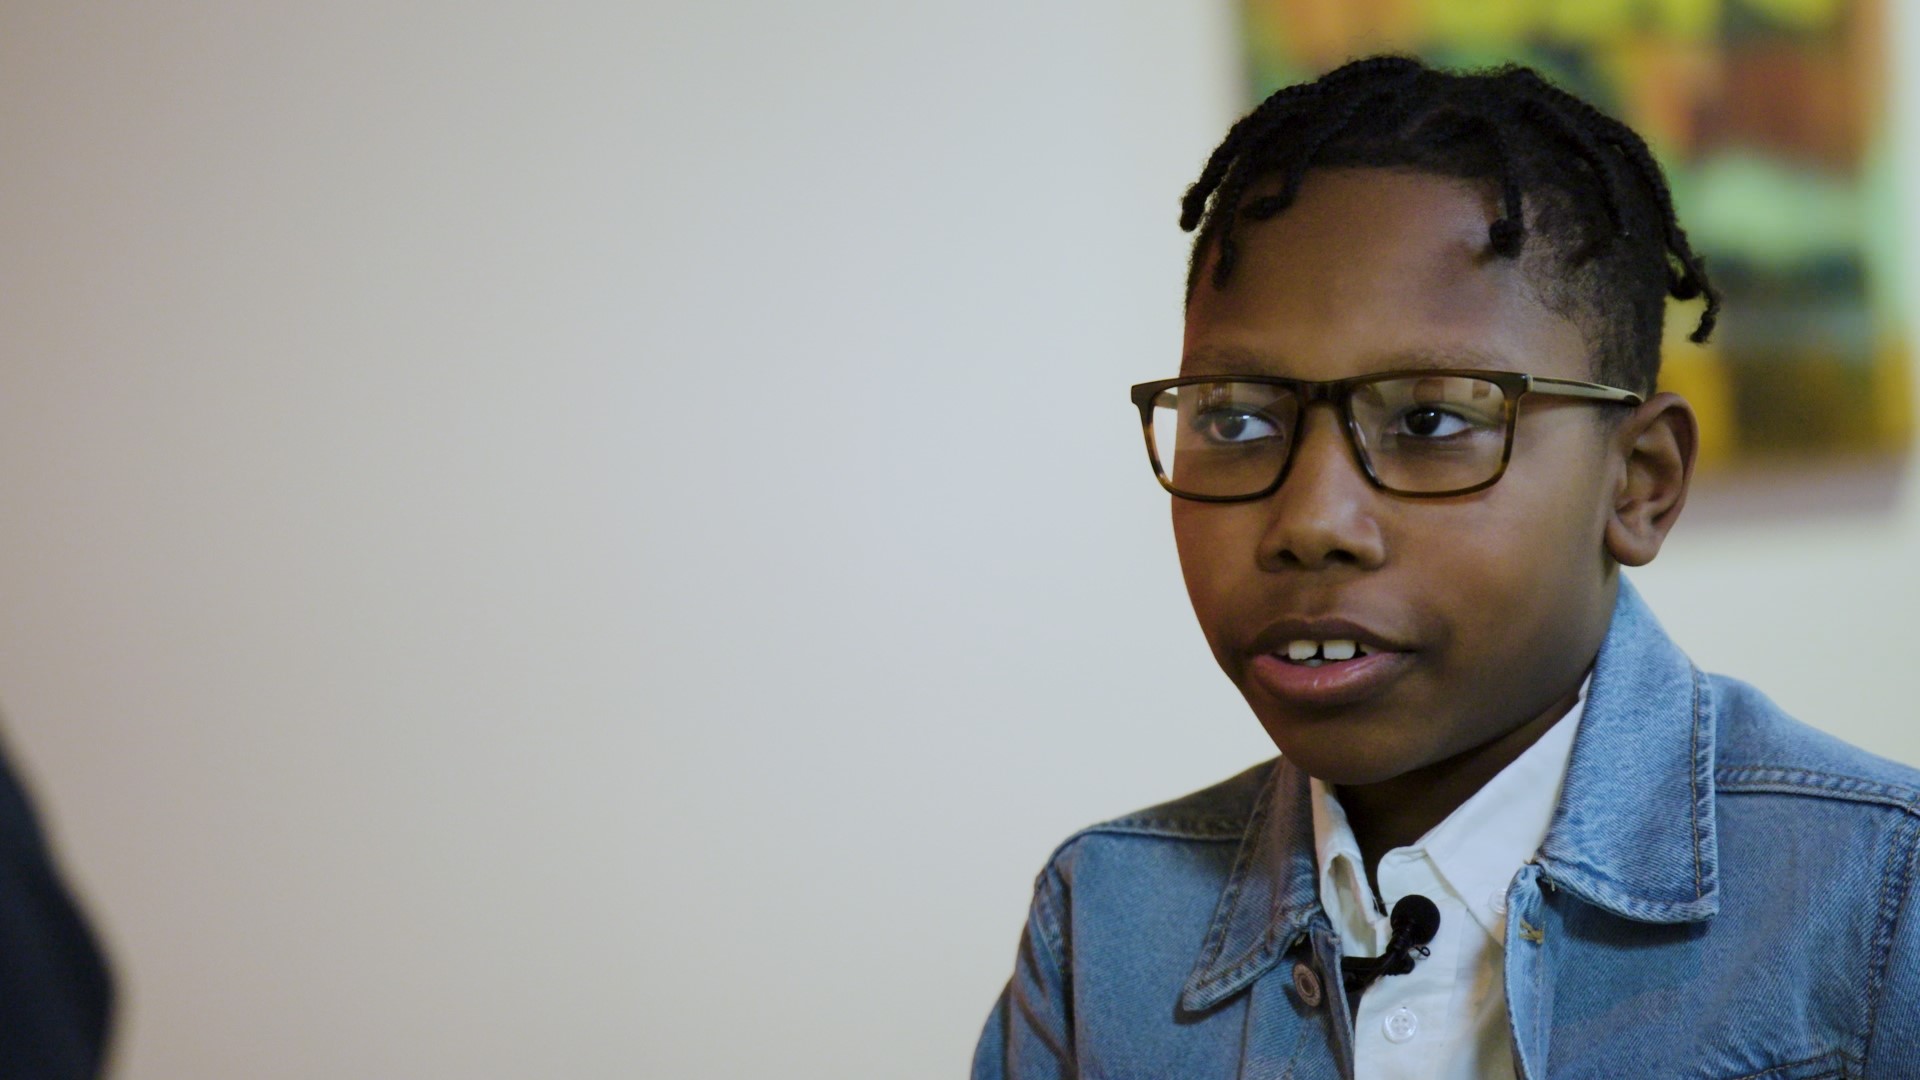 Amari, 11, and his father Chris talk about what they have learned about Black history and what they wish they had learned.